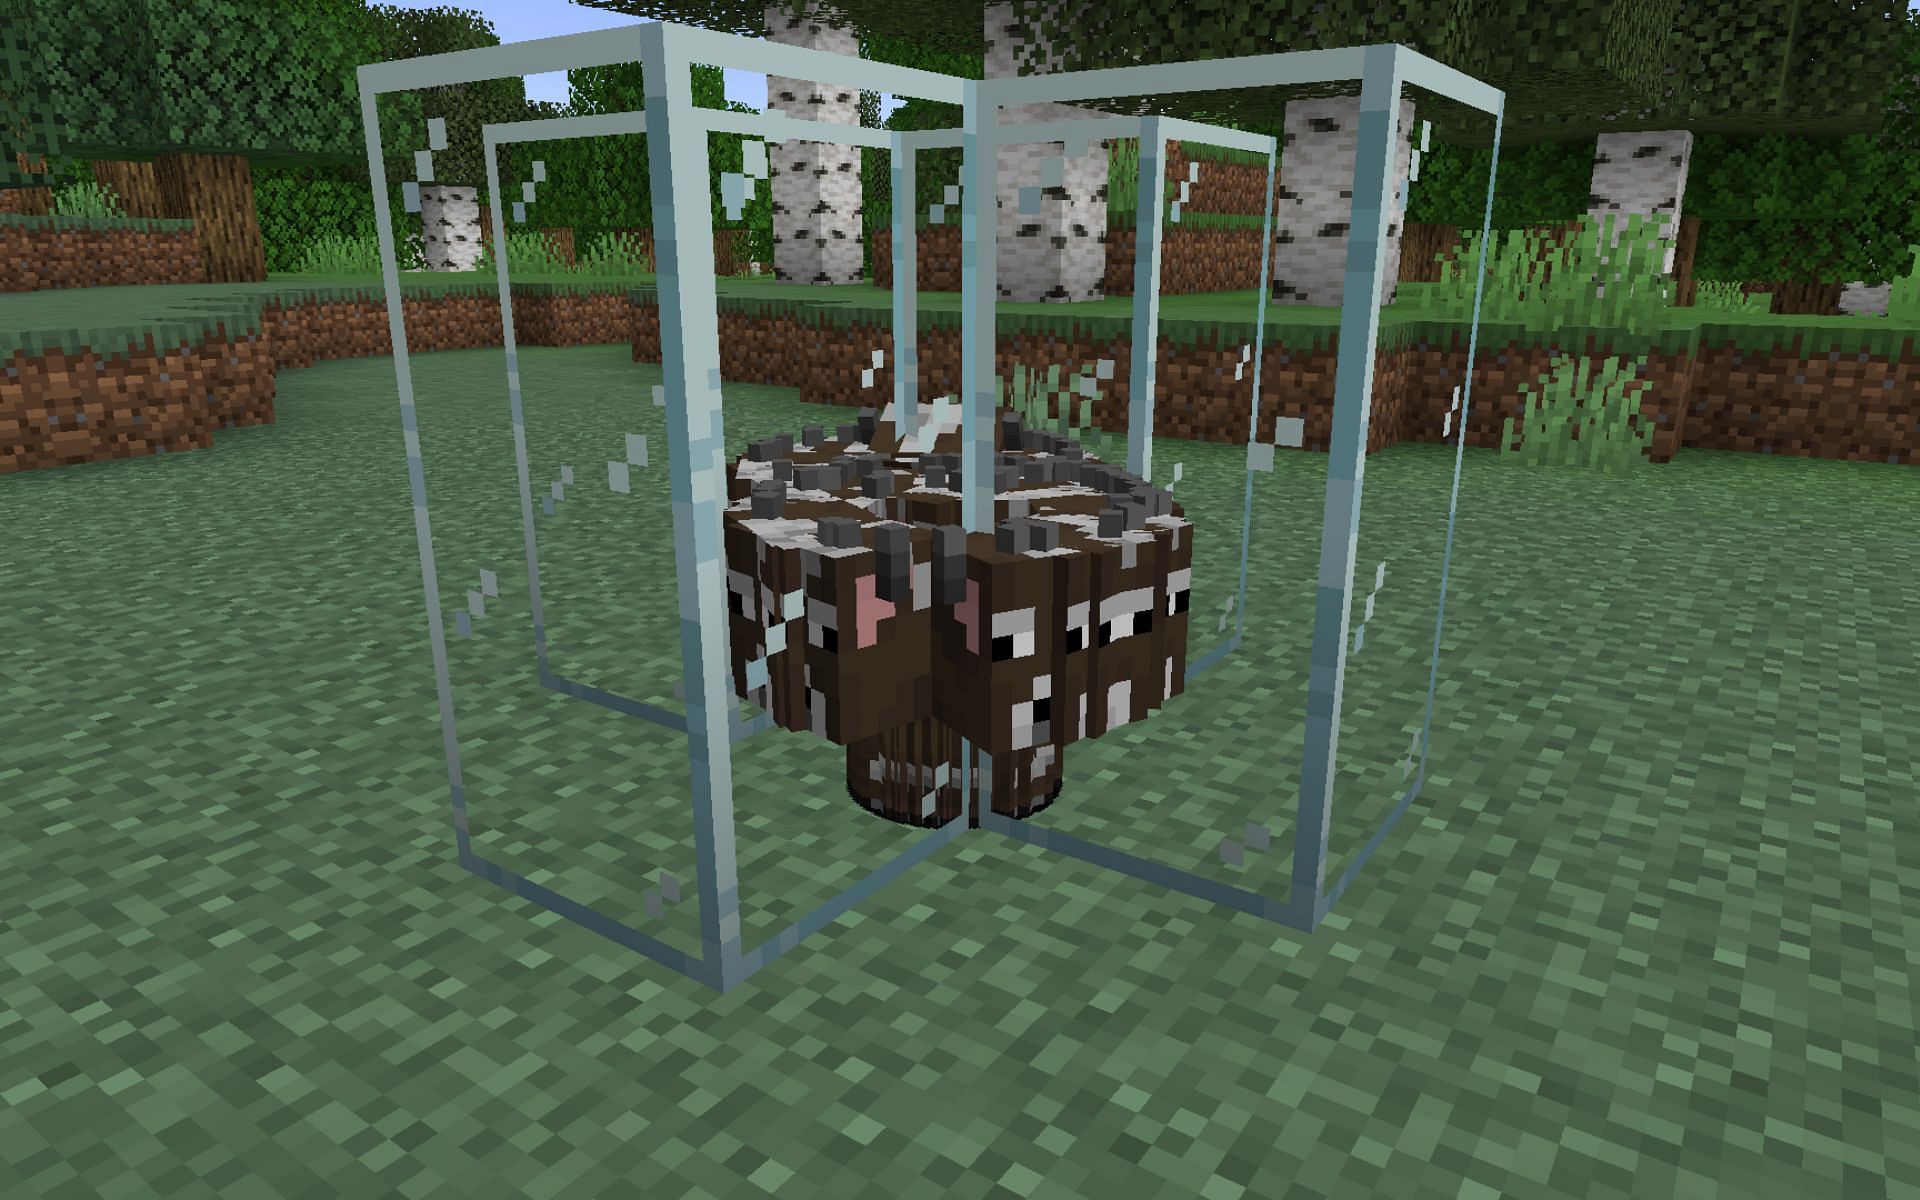 Mob crusher farm can be quite compact and useful in Minecraft (Image via Mojang)